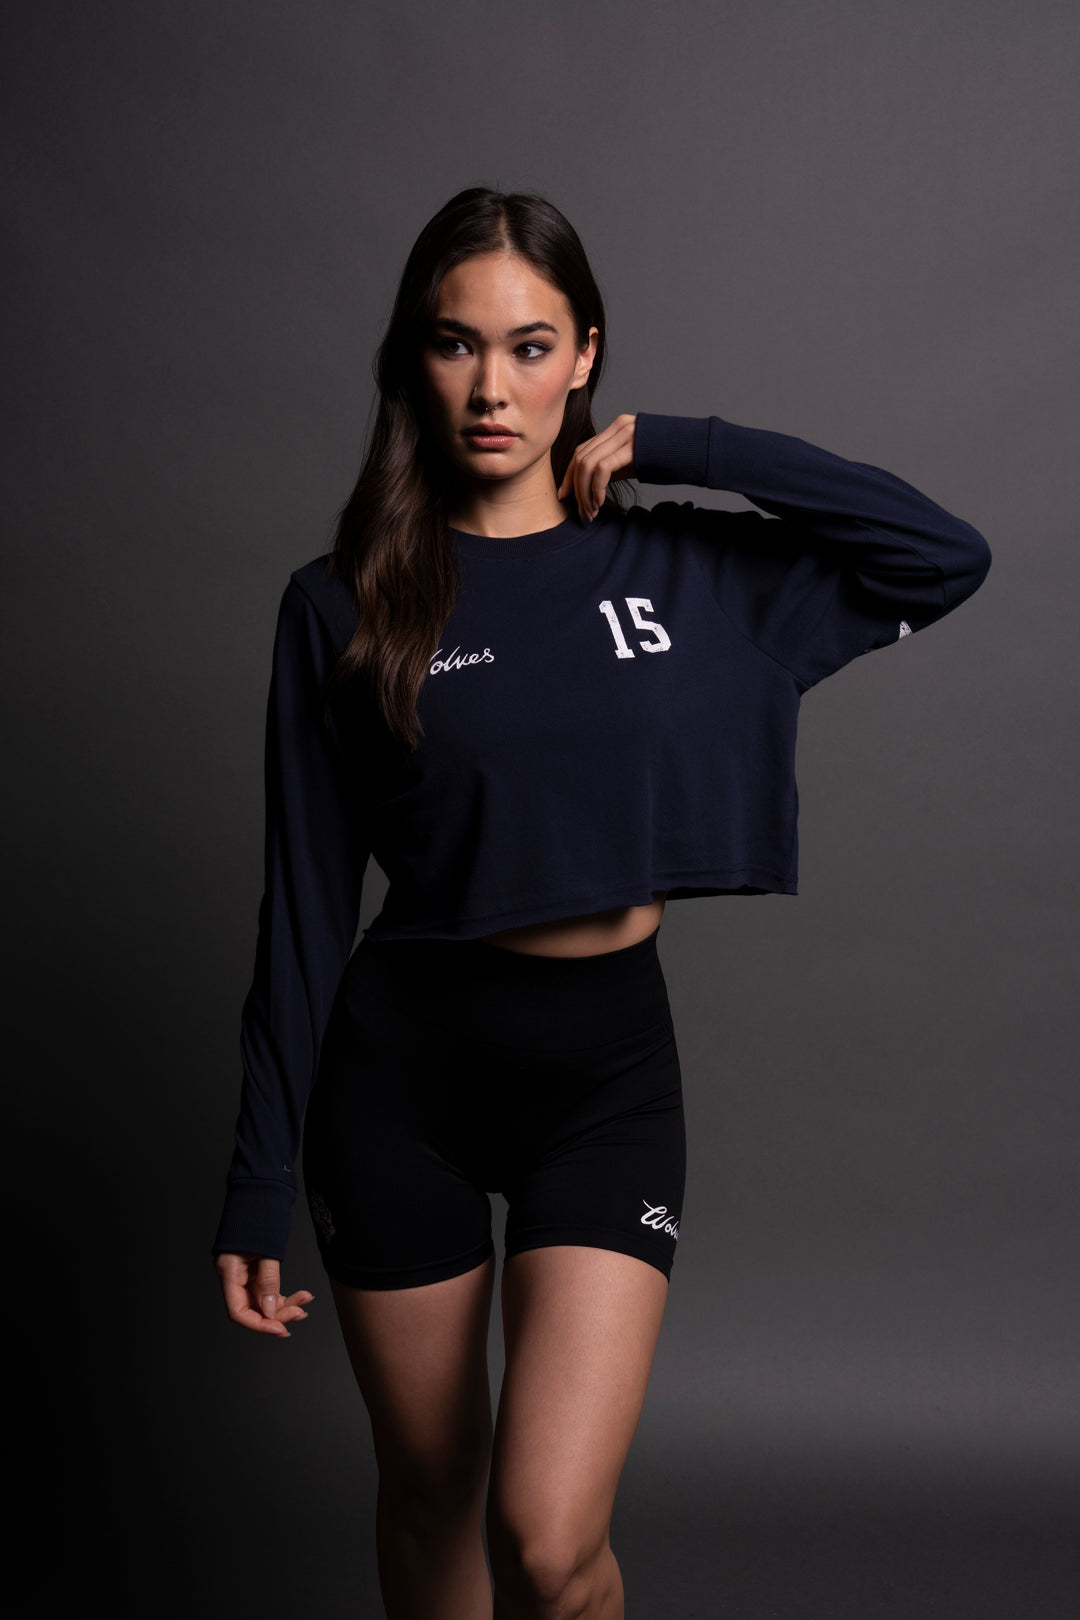 In The Stars "Premium" (Cropped) (LS) Tee in Navy